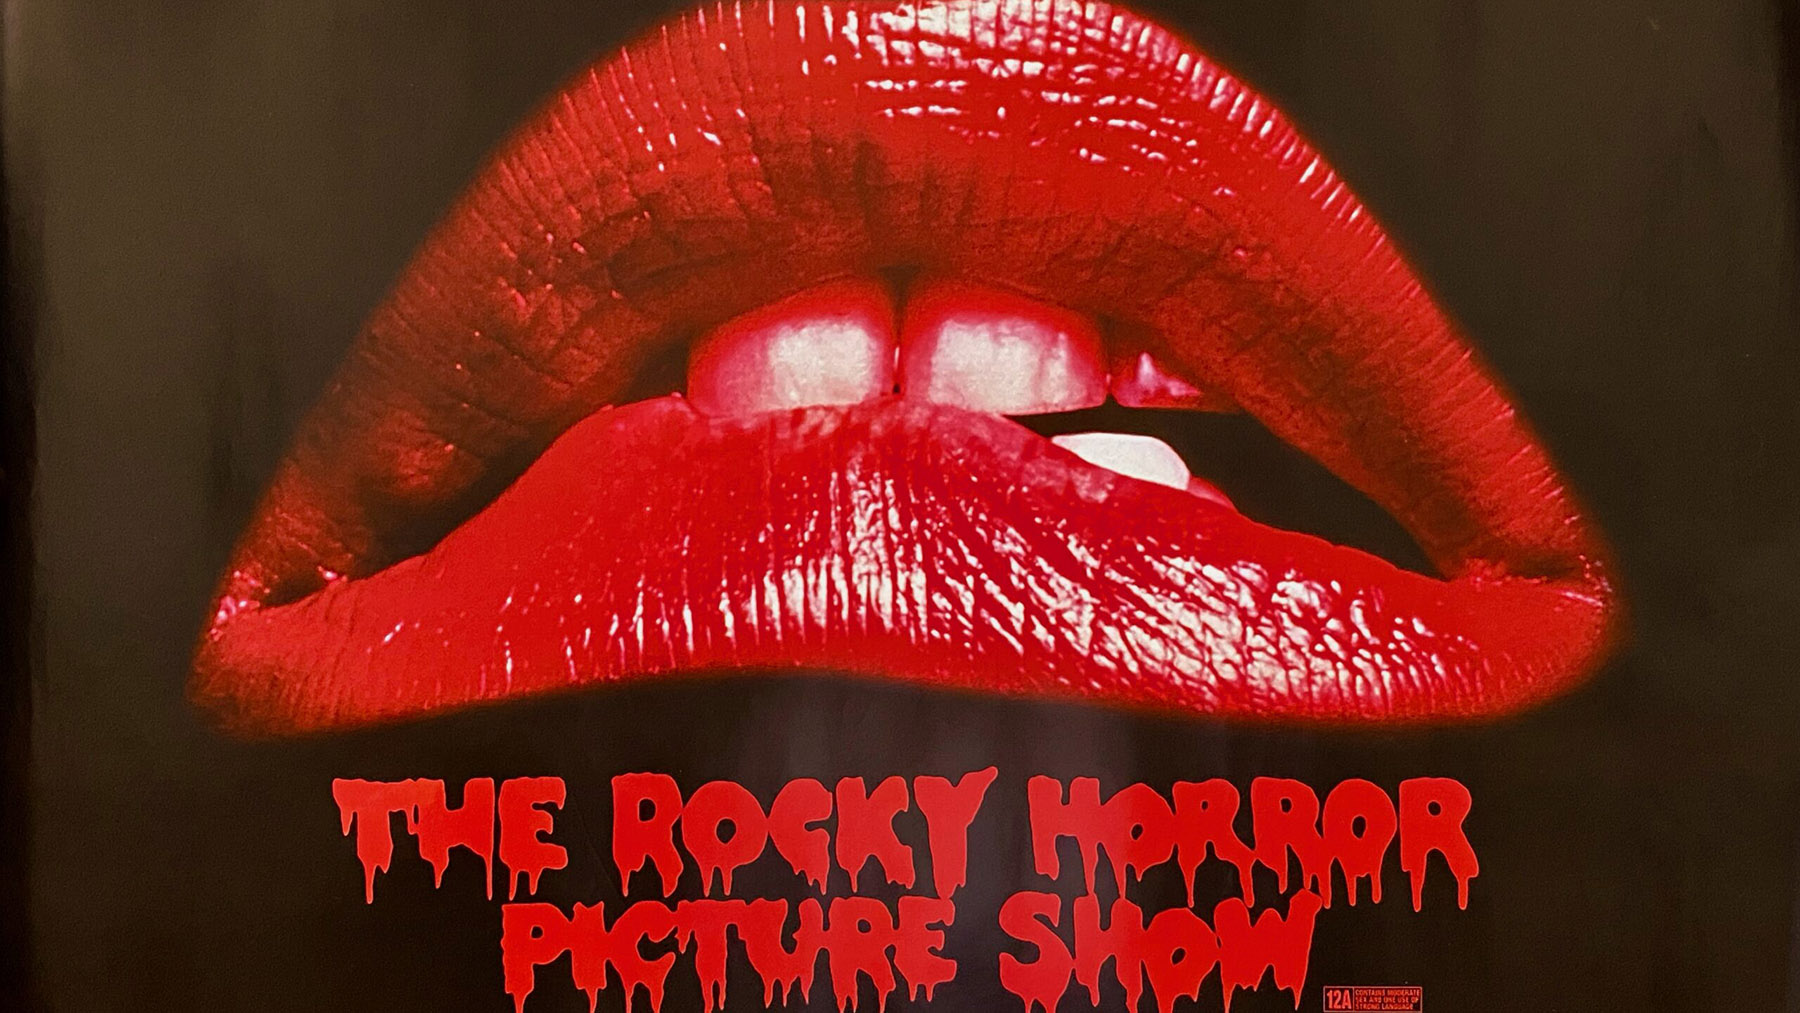 A cropped portion of a promotional poster for The Rocky Horror Picture Show